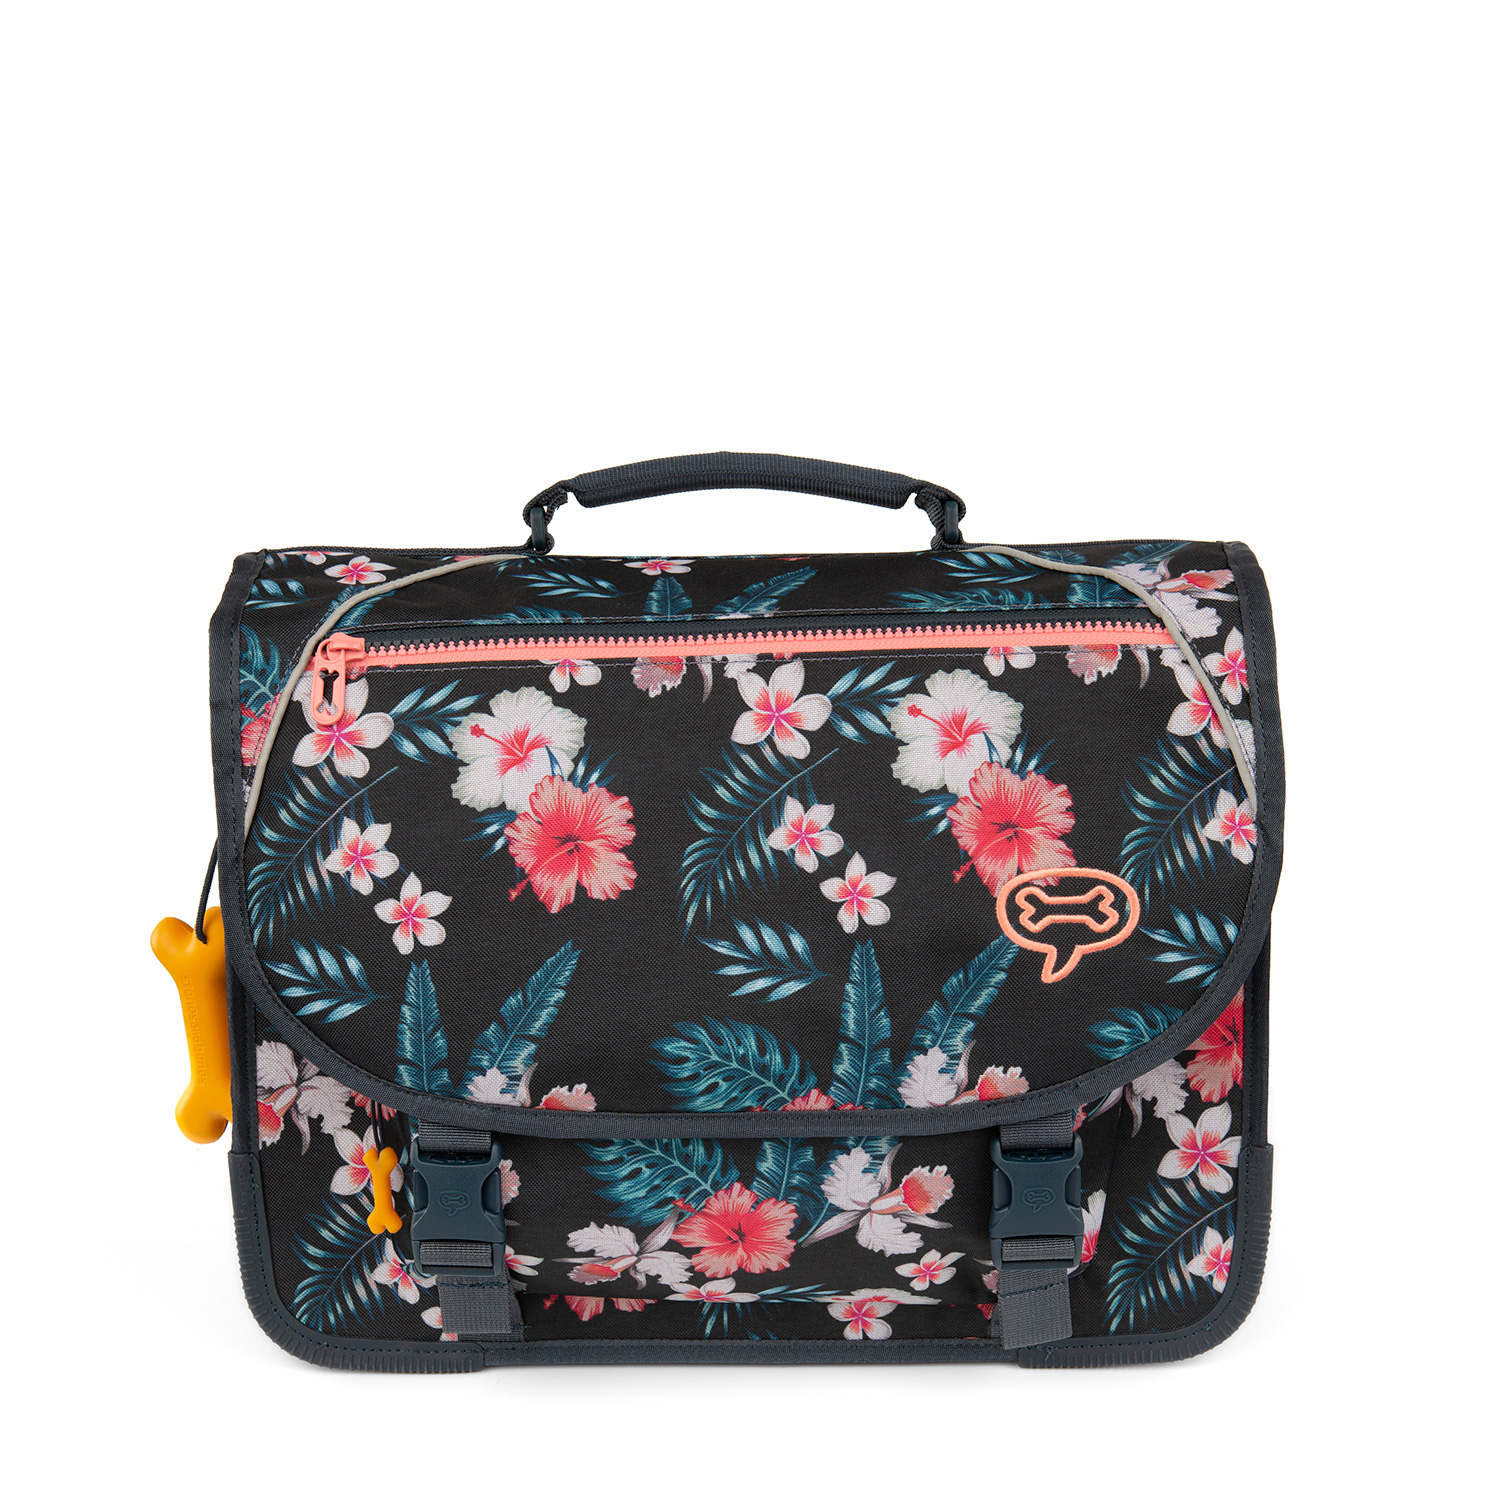 Lily - FLOWERS navy